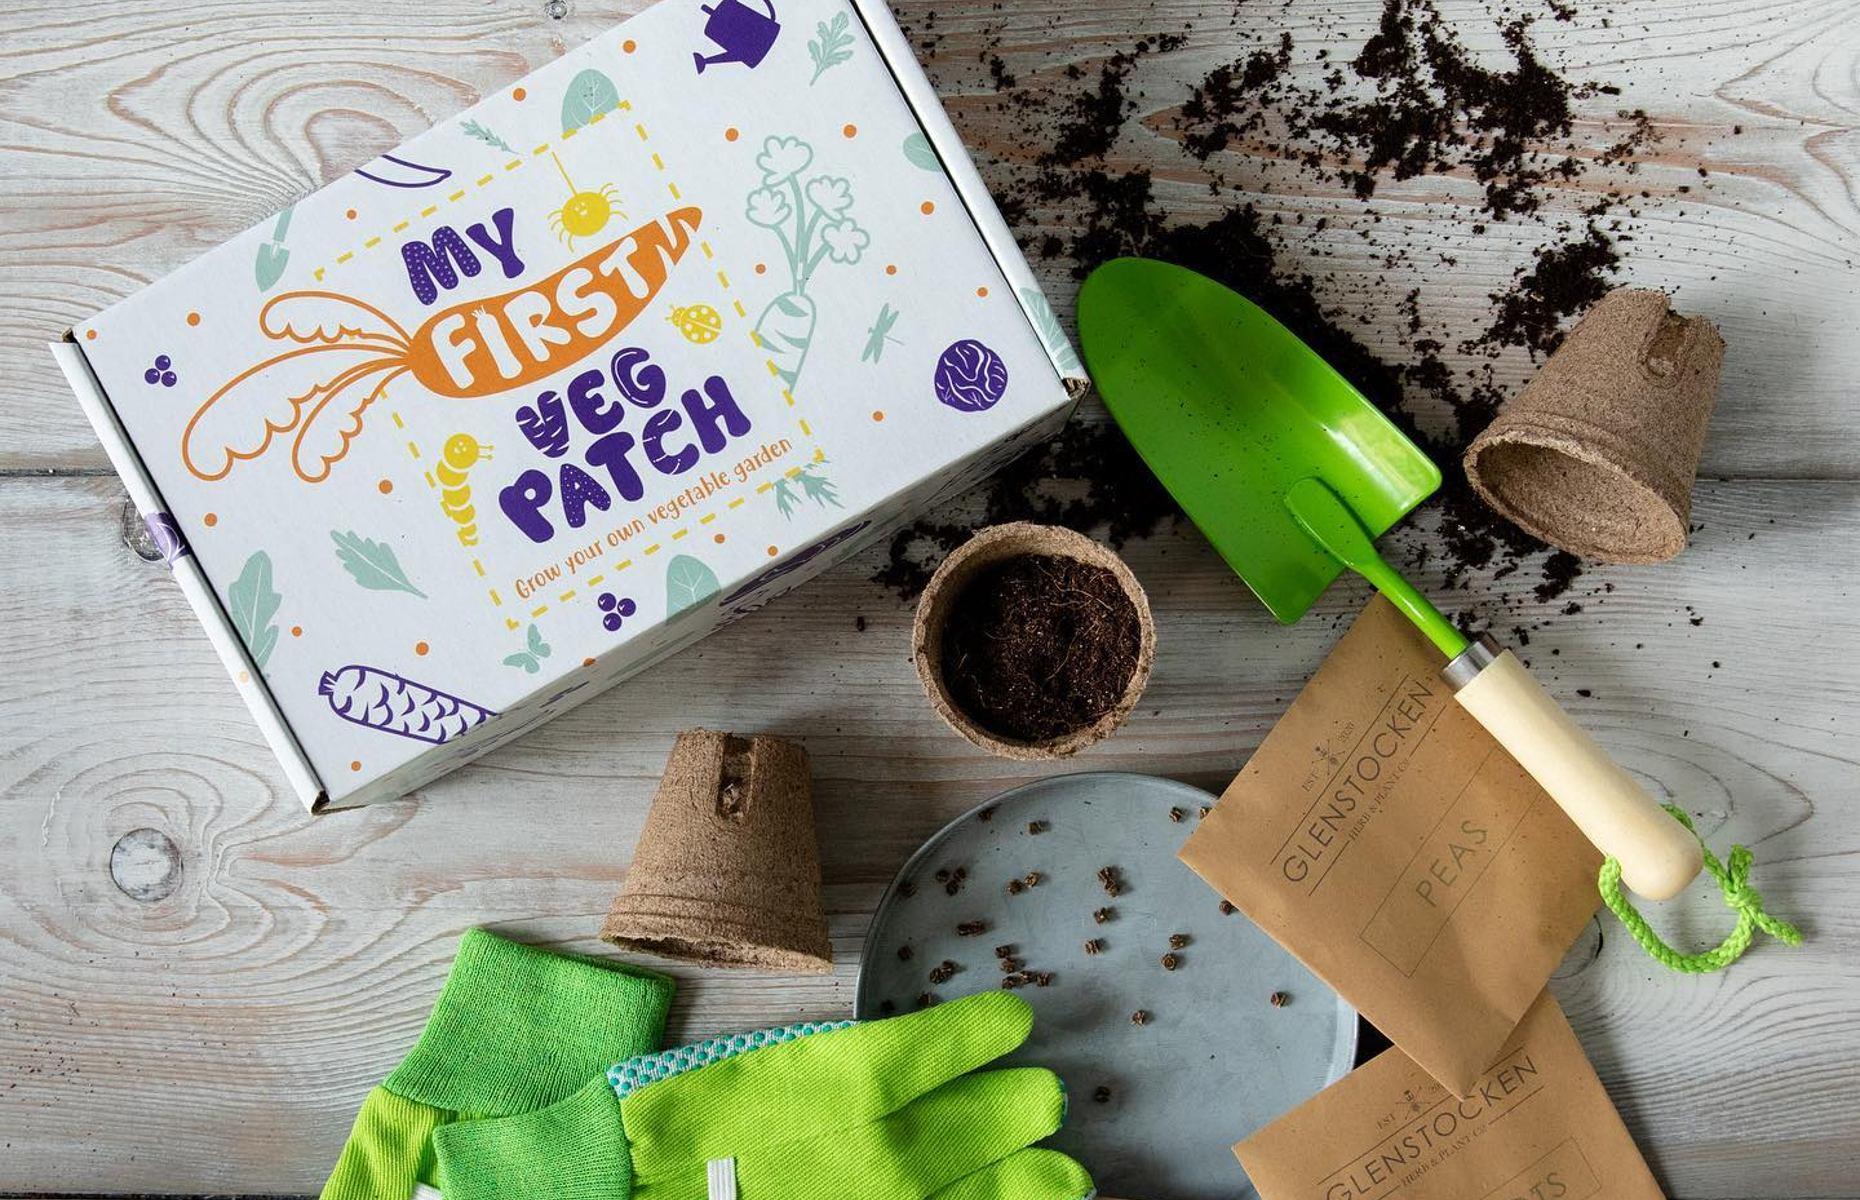 <p>There are heaps of gardening paraphernalia out there to encourage your child to get their hands dirty outside in the fresh air from cute gardening tool sets to this fabulous <a href="https://www.instagram.com/p/CKtqOJknriw/">Kids Grow Your Own Veg Patch Kit</a>, which might even inspire them to eat their greens. Gardening helps stimulate your child’s senses of sight, sound, taste and smell which is central to their development.</p>